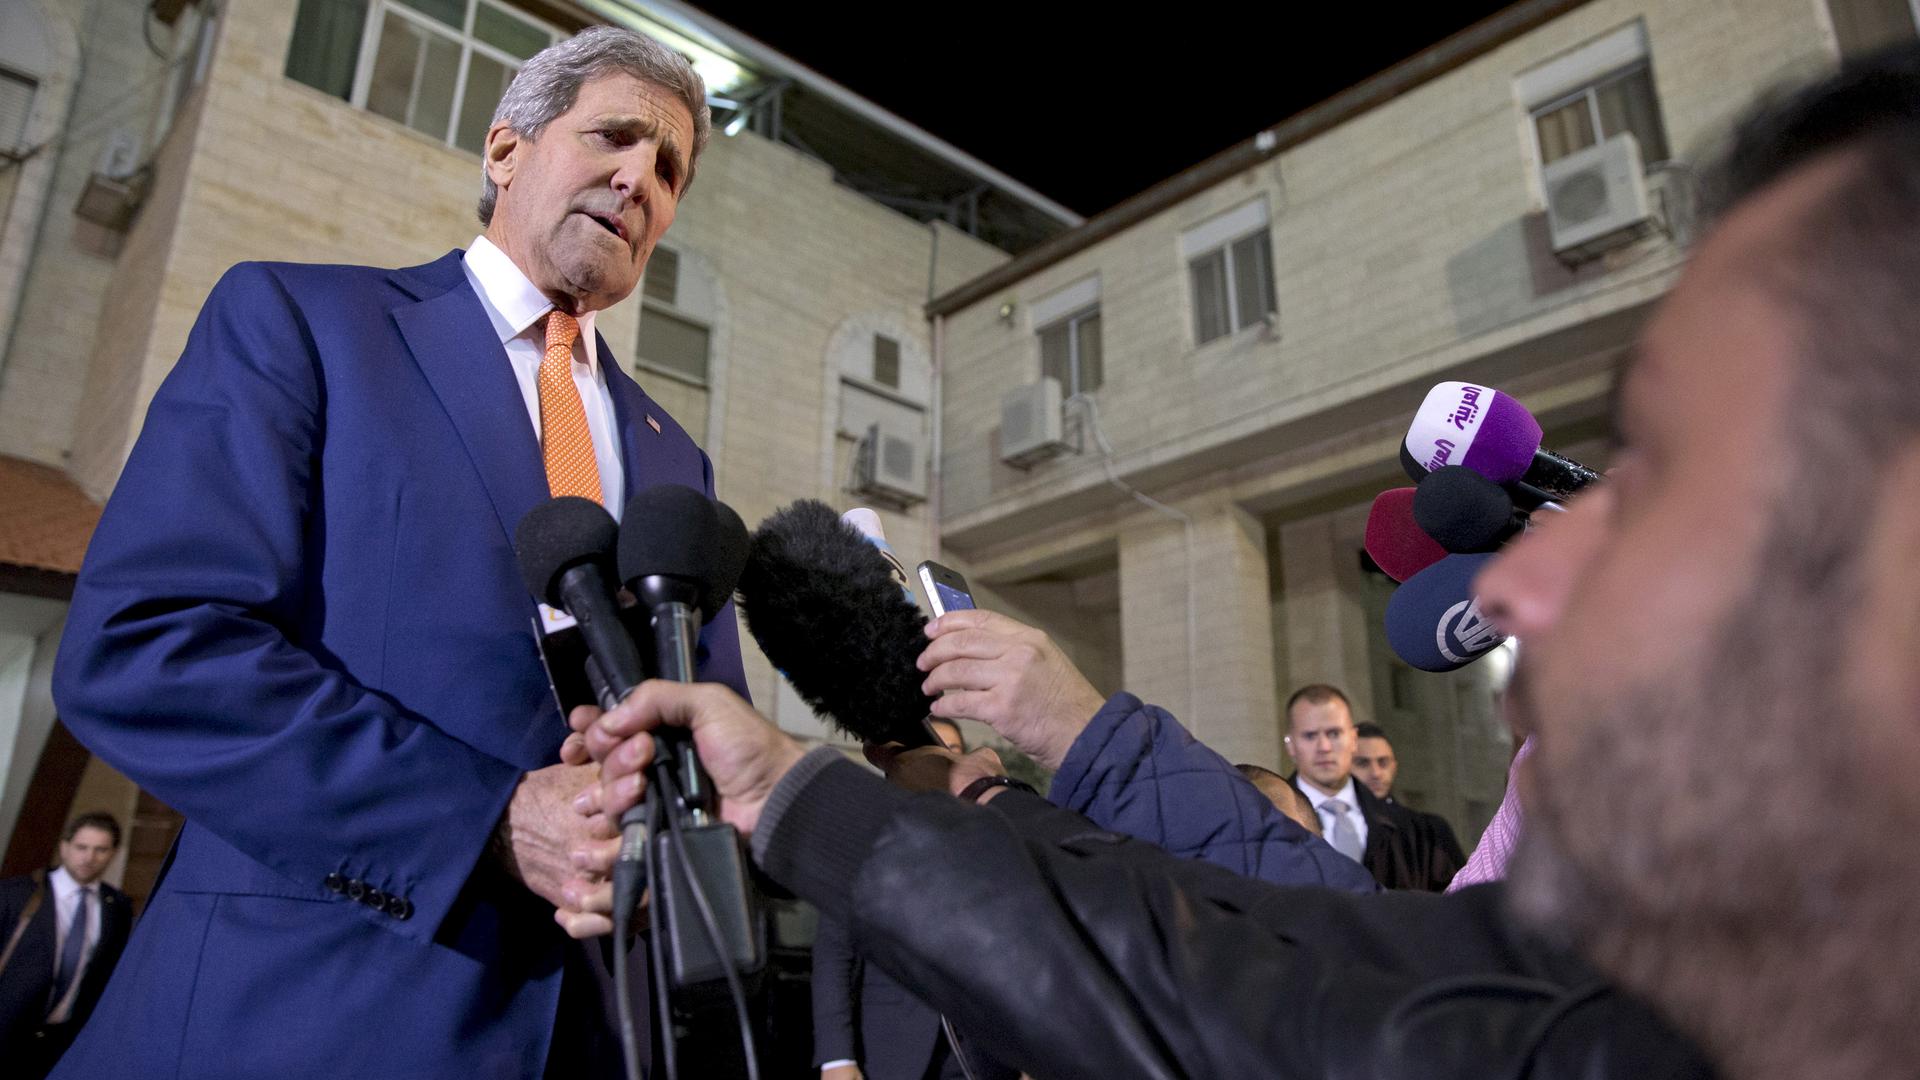 U.S. Secretary of State John Kerry makes impromptu remarks to members of the media after meeting with Palestinian President Mahmoud Abbas.